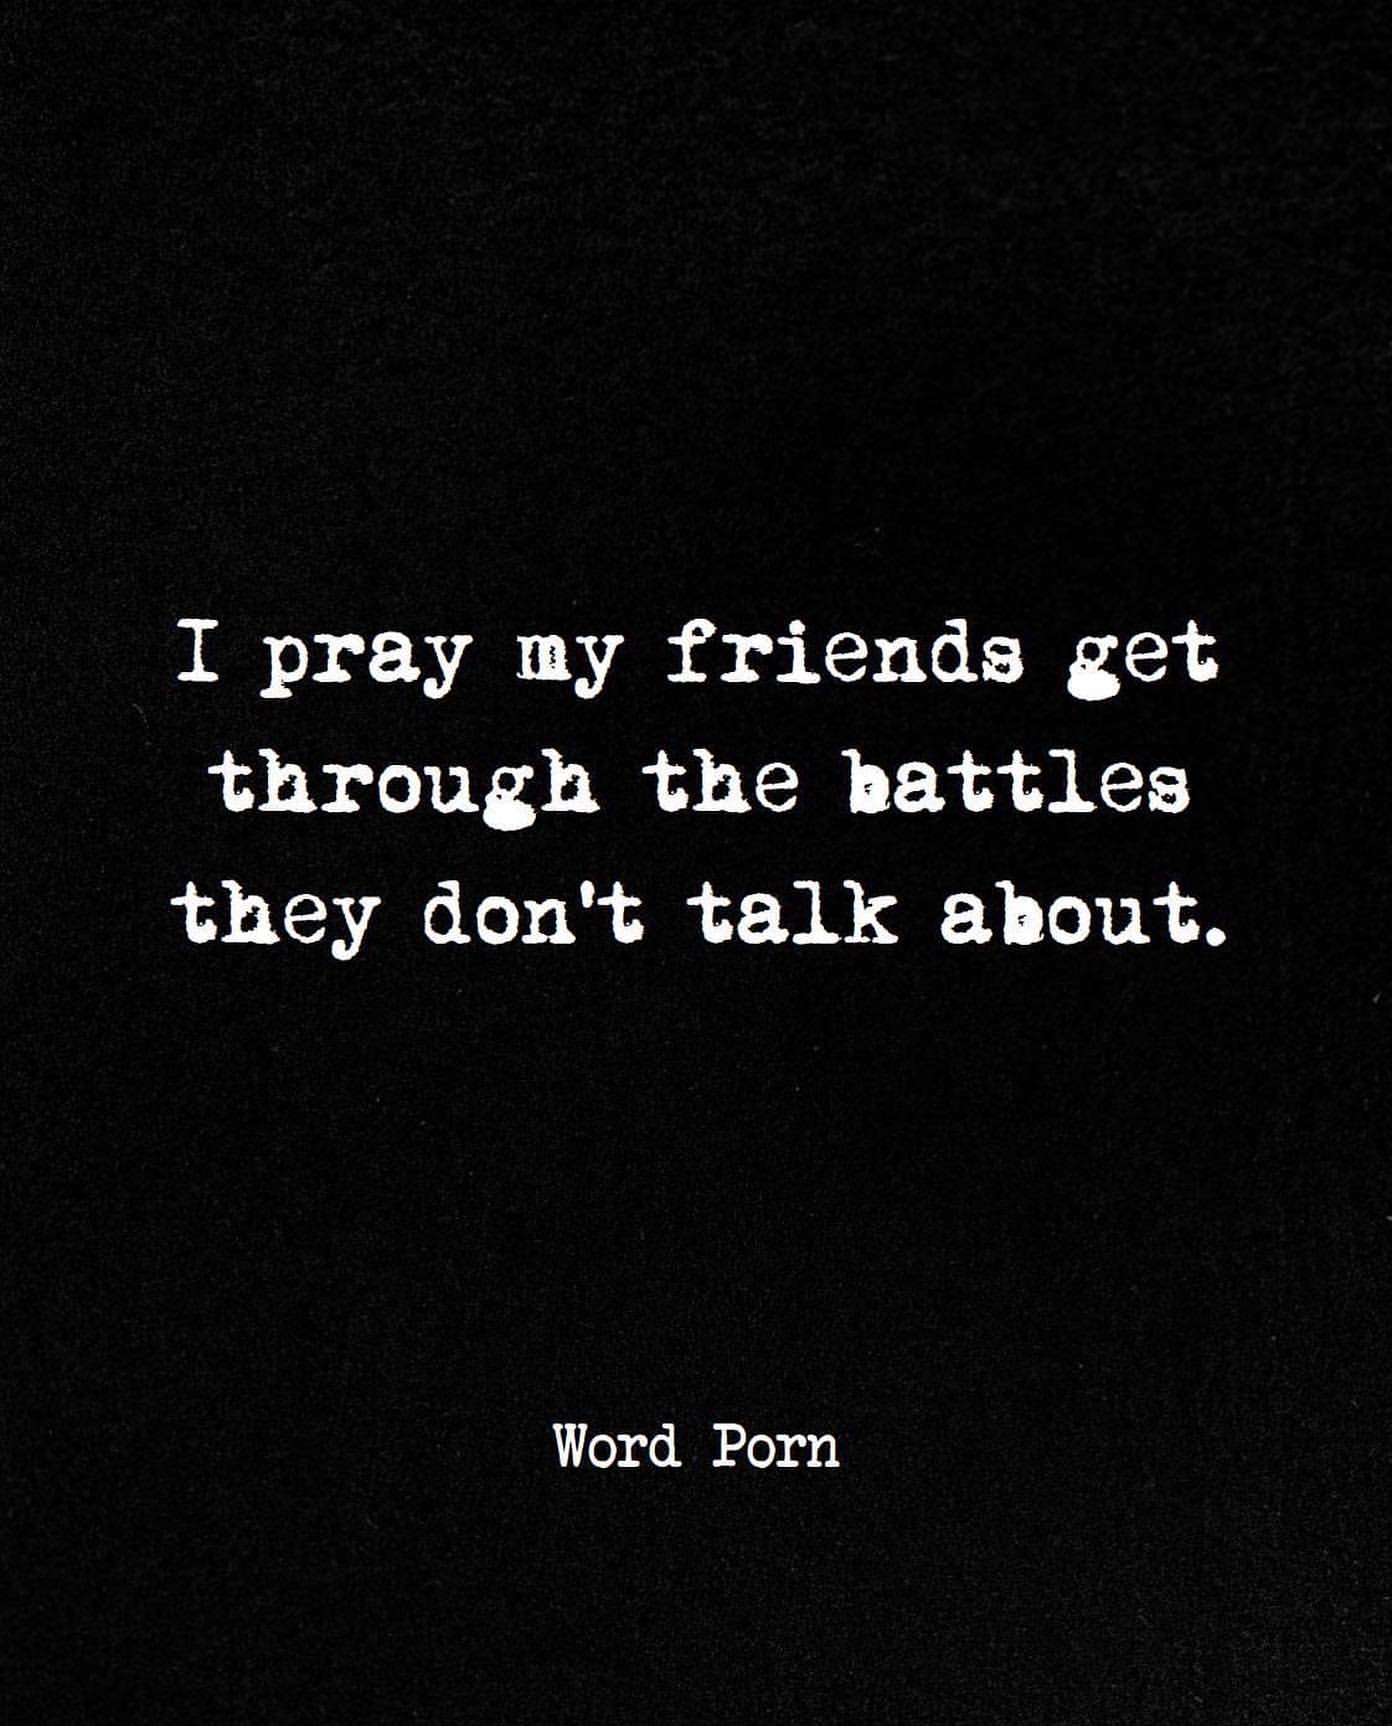 I pray my friends get through the battles they don't talk about.